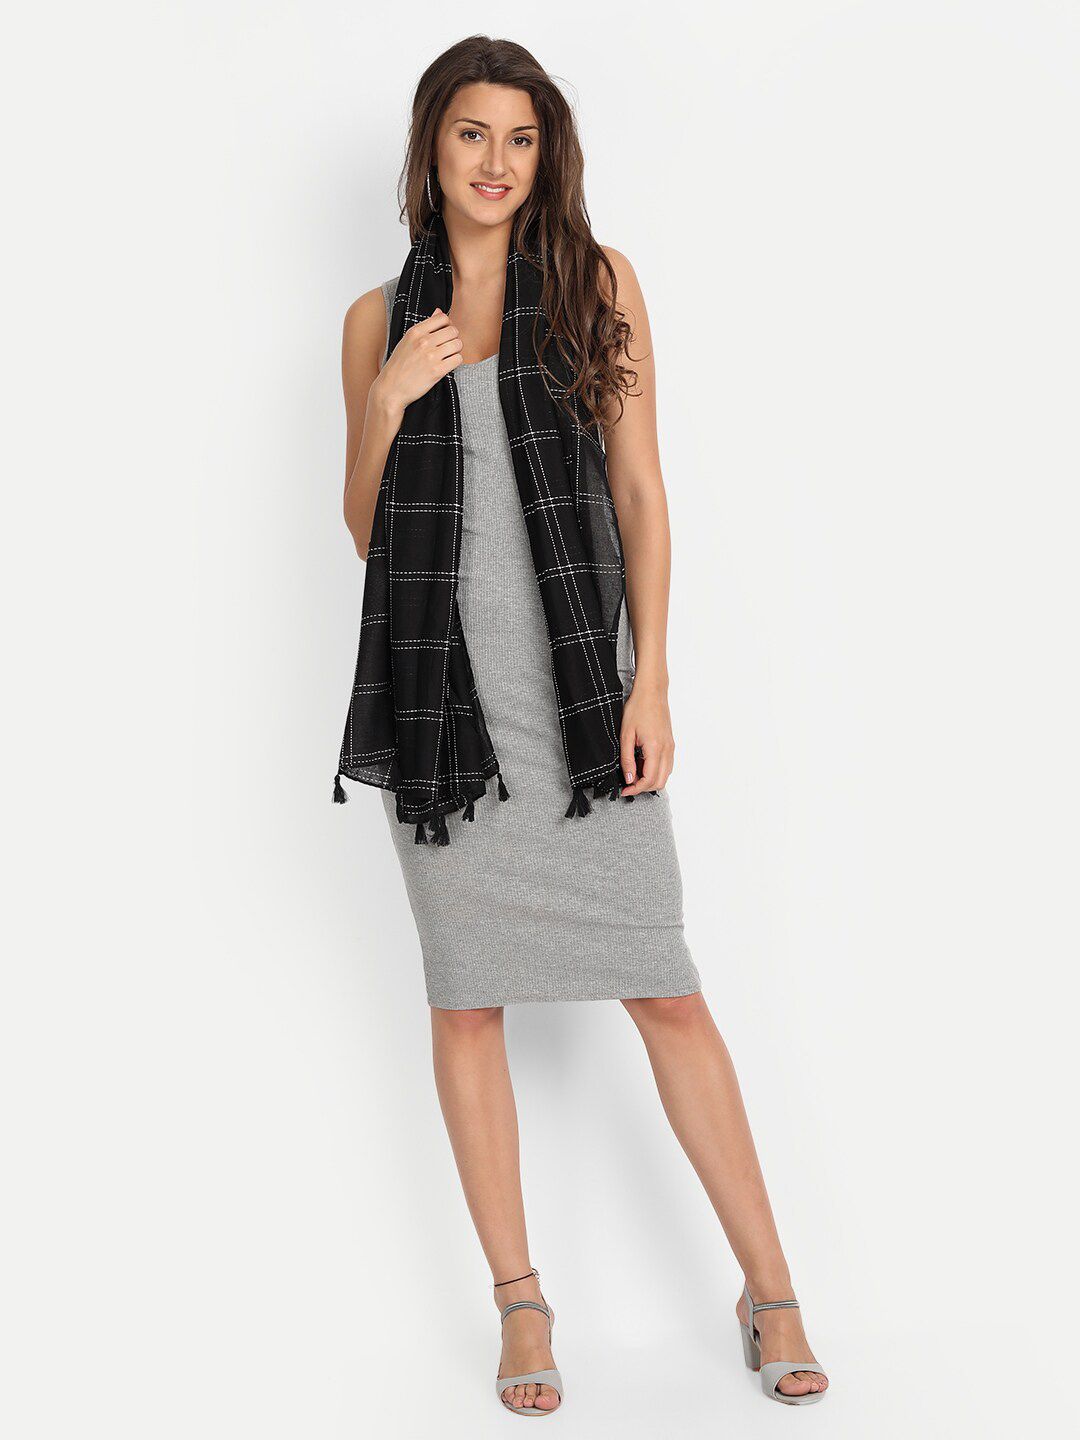 Wicked Stitch Women Black & White Checked Scarf Price in India